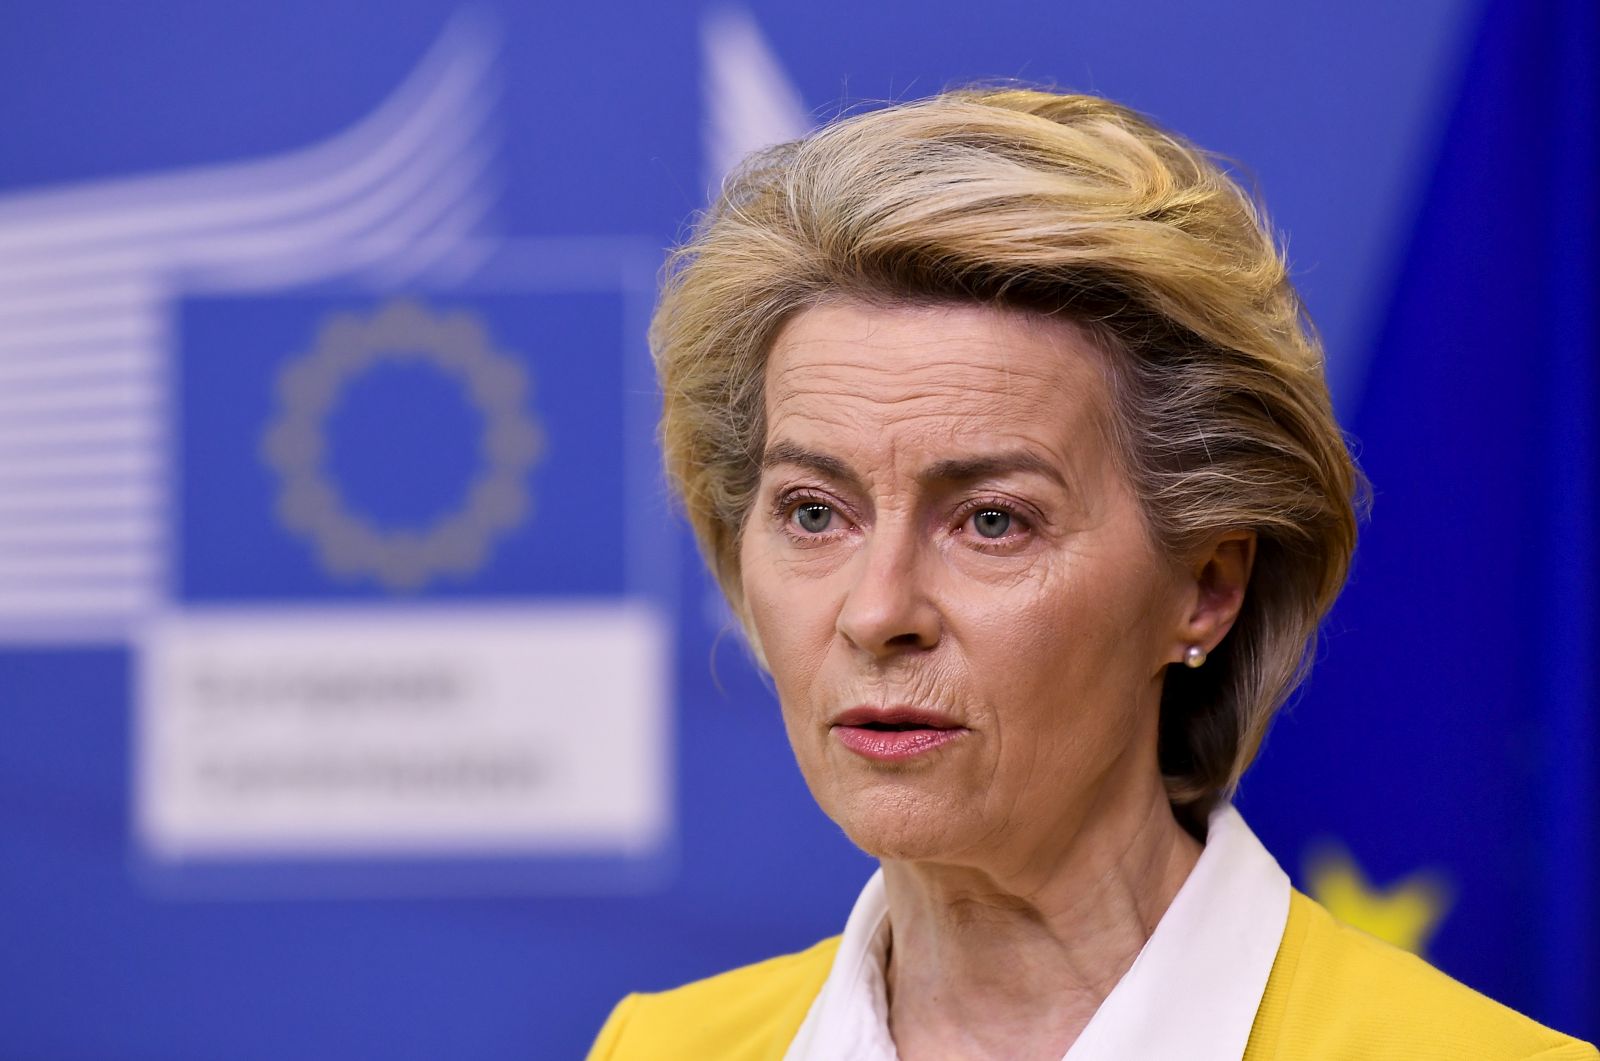 epa09134956 European Commission President Ursula von der Leyen delivers a statement after a college meeting at the EU headquarters in Brussels, Belgium, 14 April 2021.  EPA/JOHN THYS / POOL